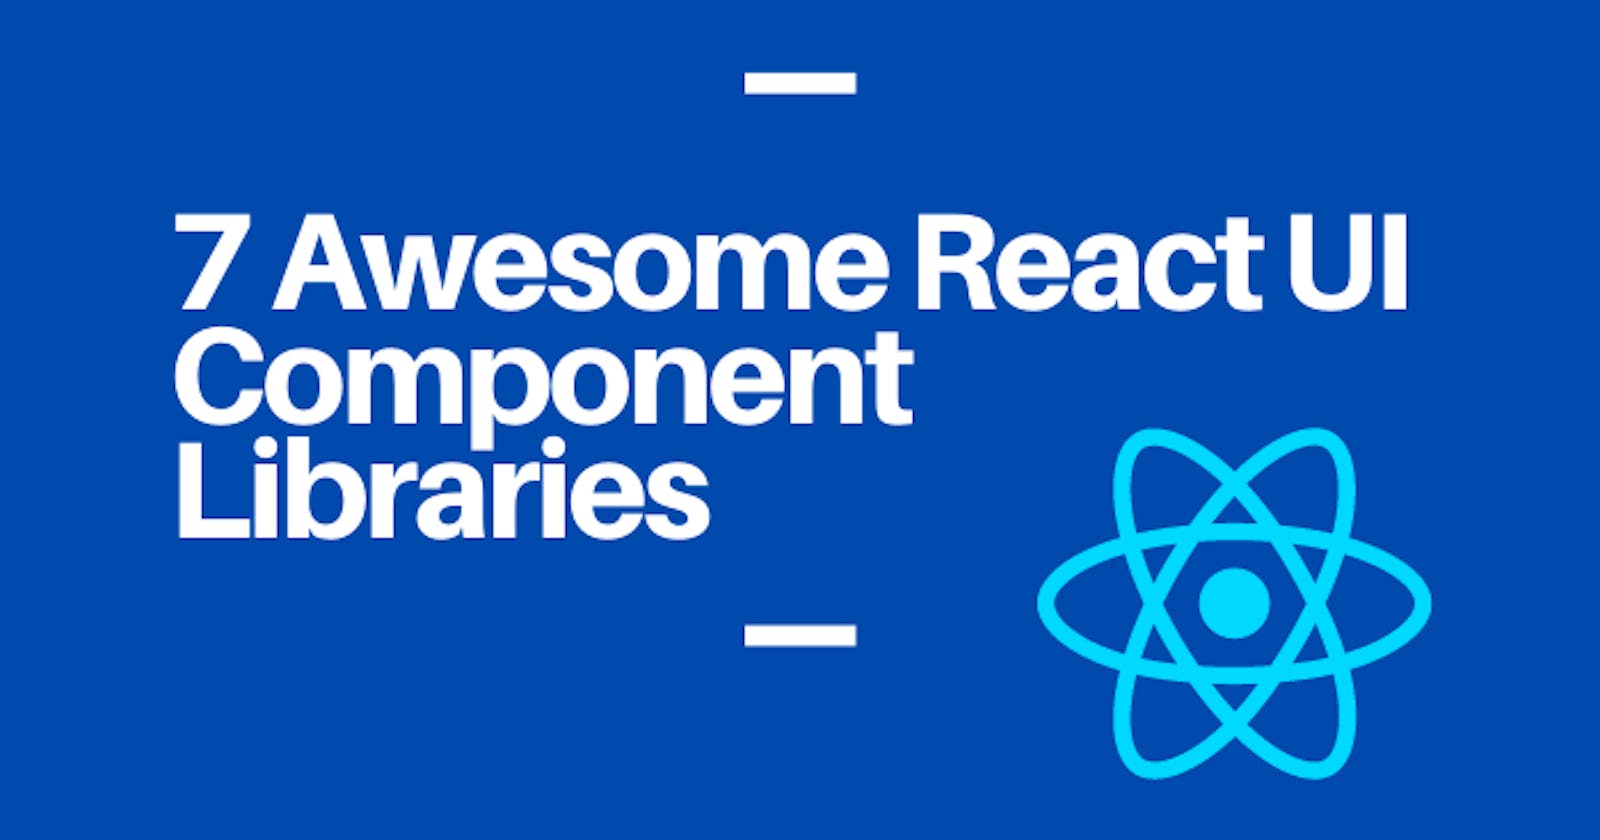 7 Awesome React UI Component Libraries